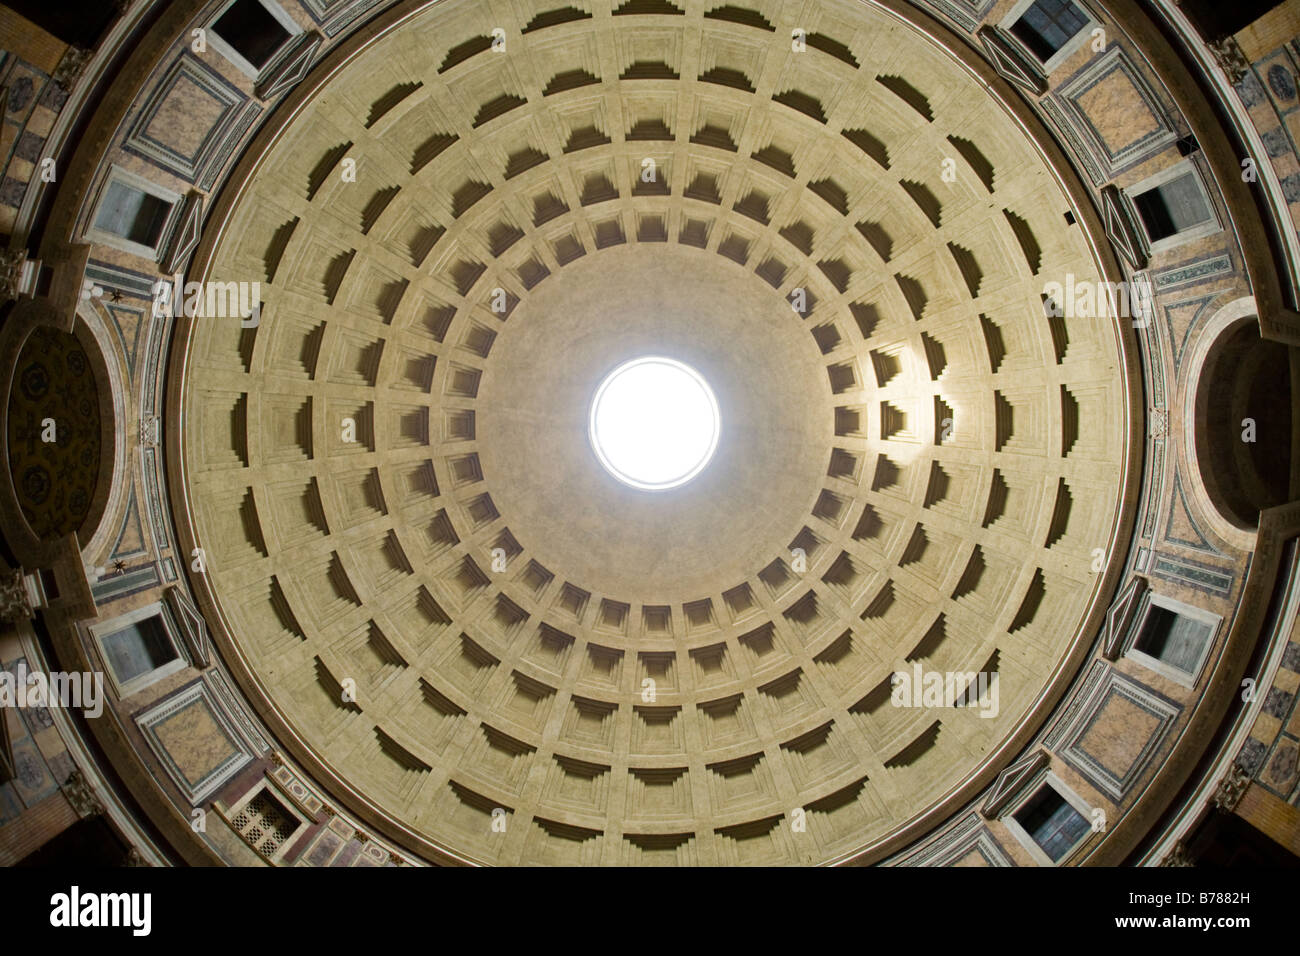 Oculus in the Pantheon in Rome italy with wide lens Stock Photo